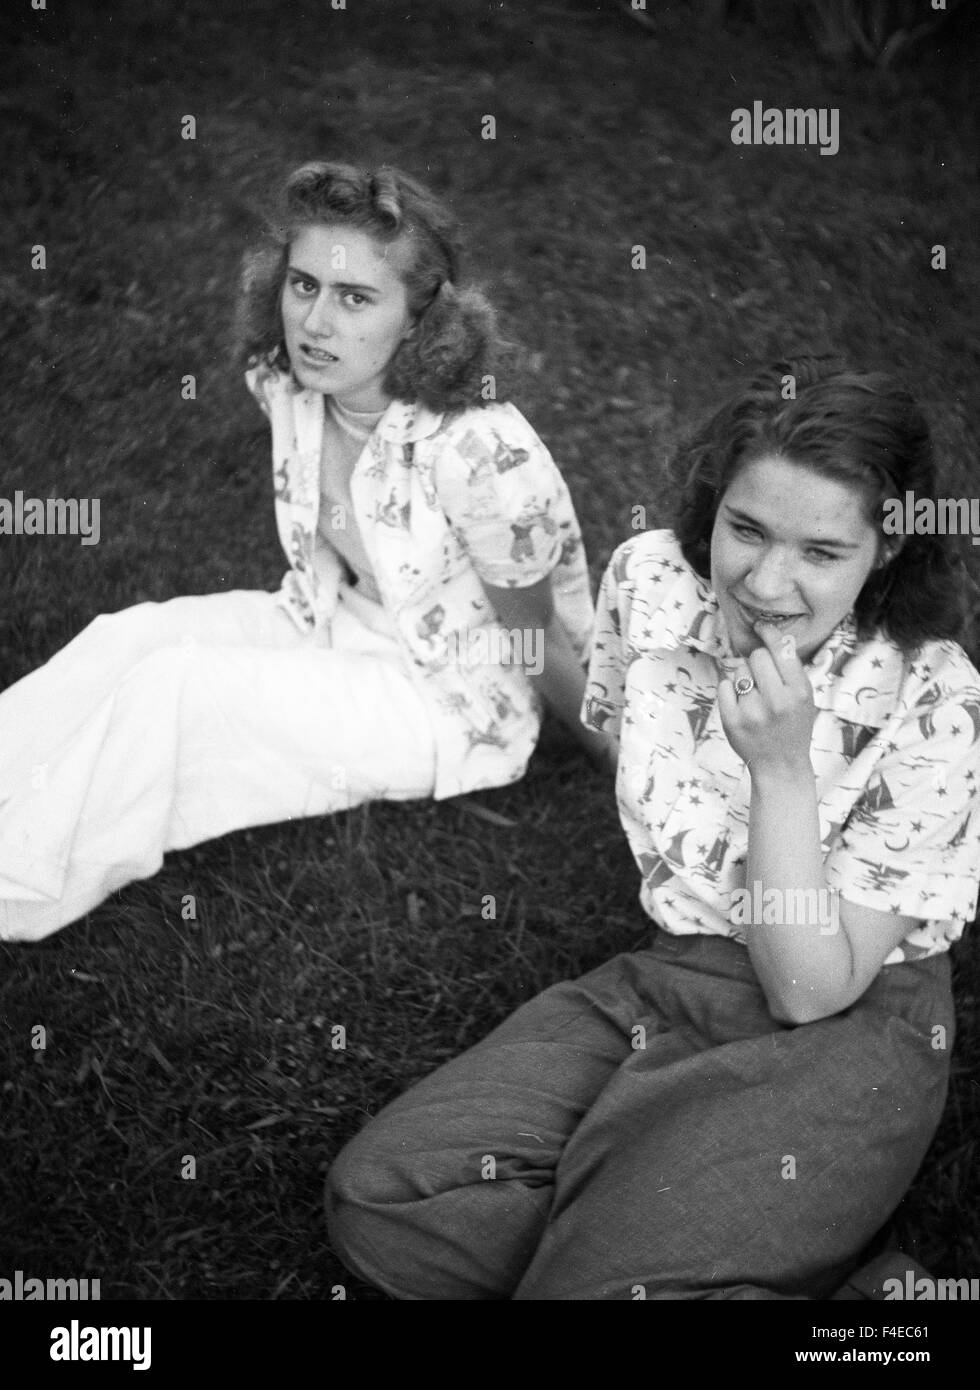 fashionable teenage girls sitting on grass during the 1940s Stock Photo